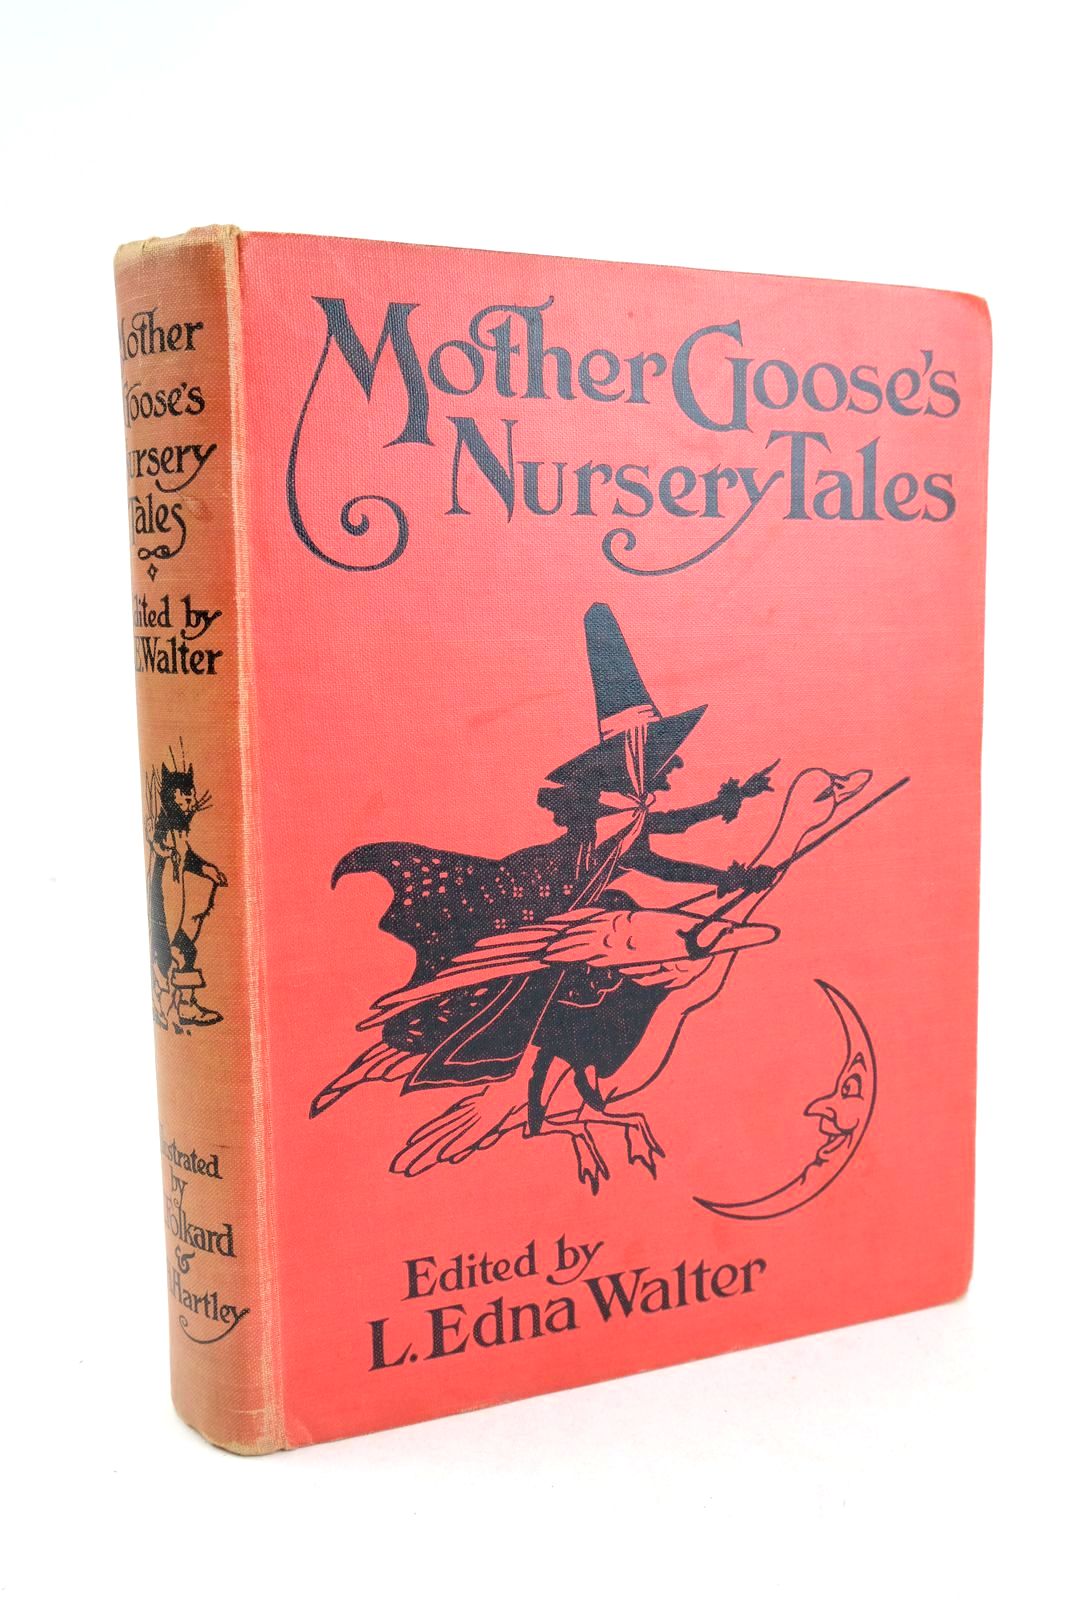 Photo of MOTHER GOOSE'S NURSERY TALES written by Walter, L. Edna illustrated by Folkard, Charles Hartley, J.H. published by A. &amp; C. Black Ltd. (STOCK CODE: 1325923)  for sale by Stella & Rose's Books